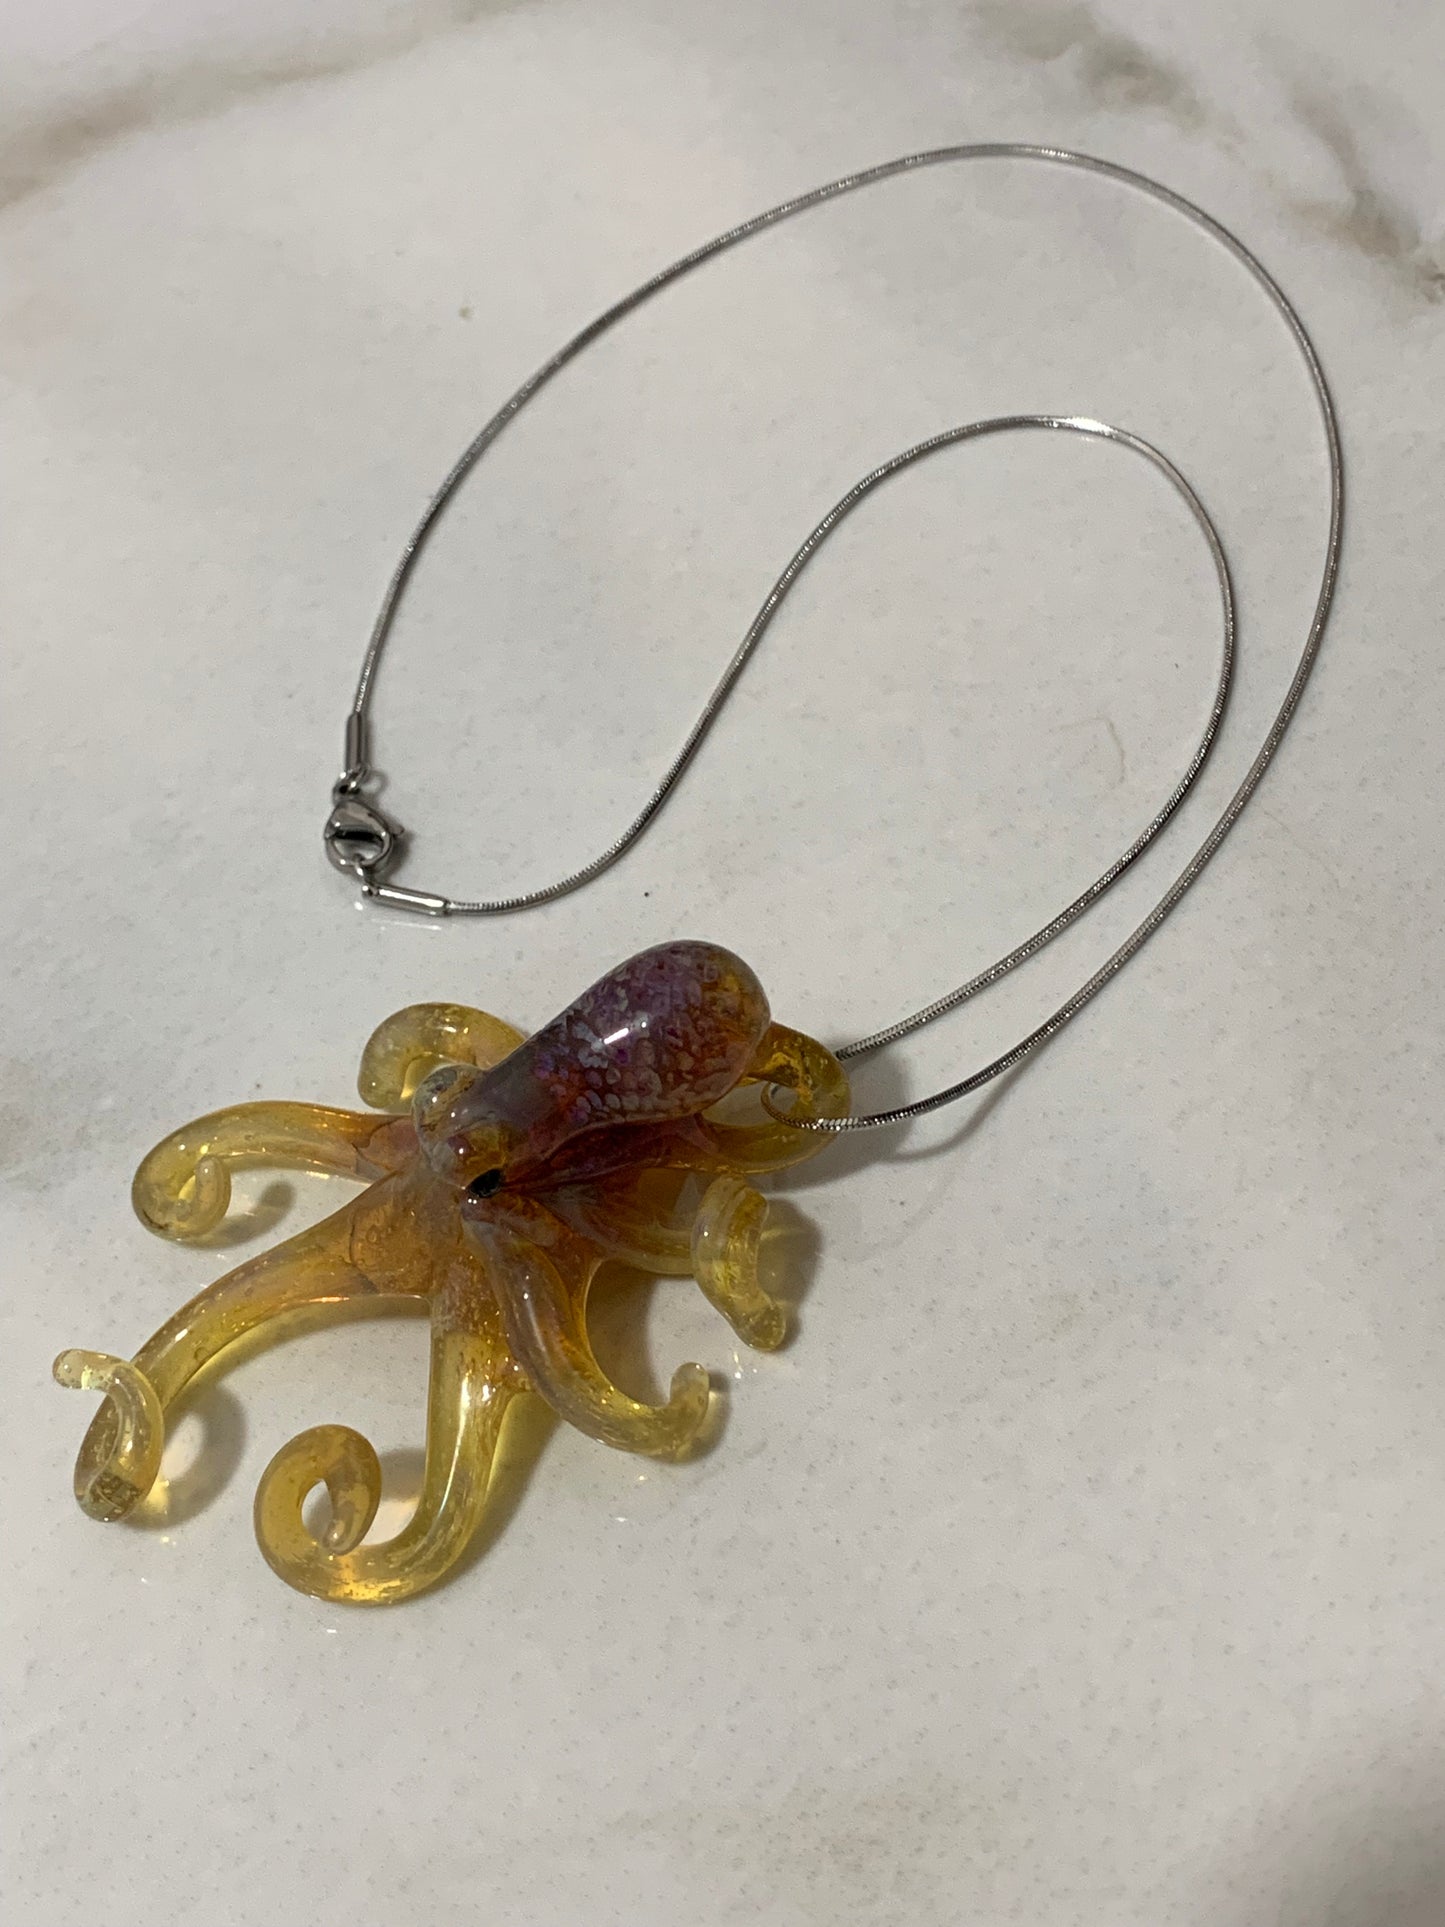 Octopus Necklace Blown Glass Pendant for Men or Women Art Deco Personal Jewelry